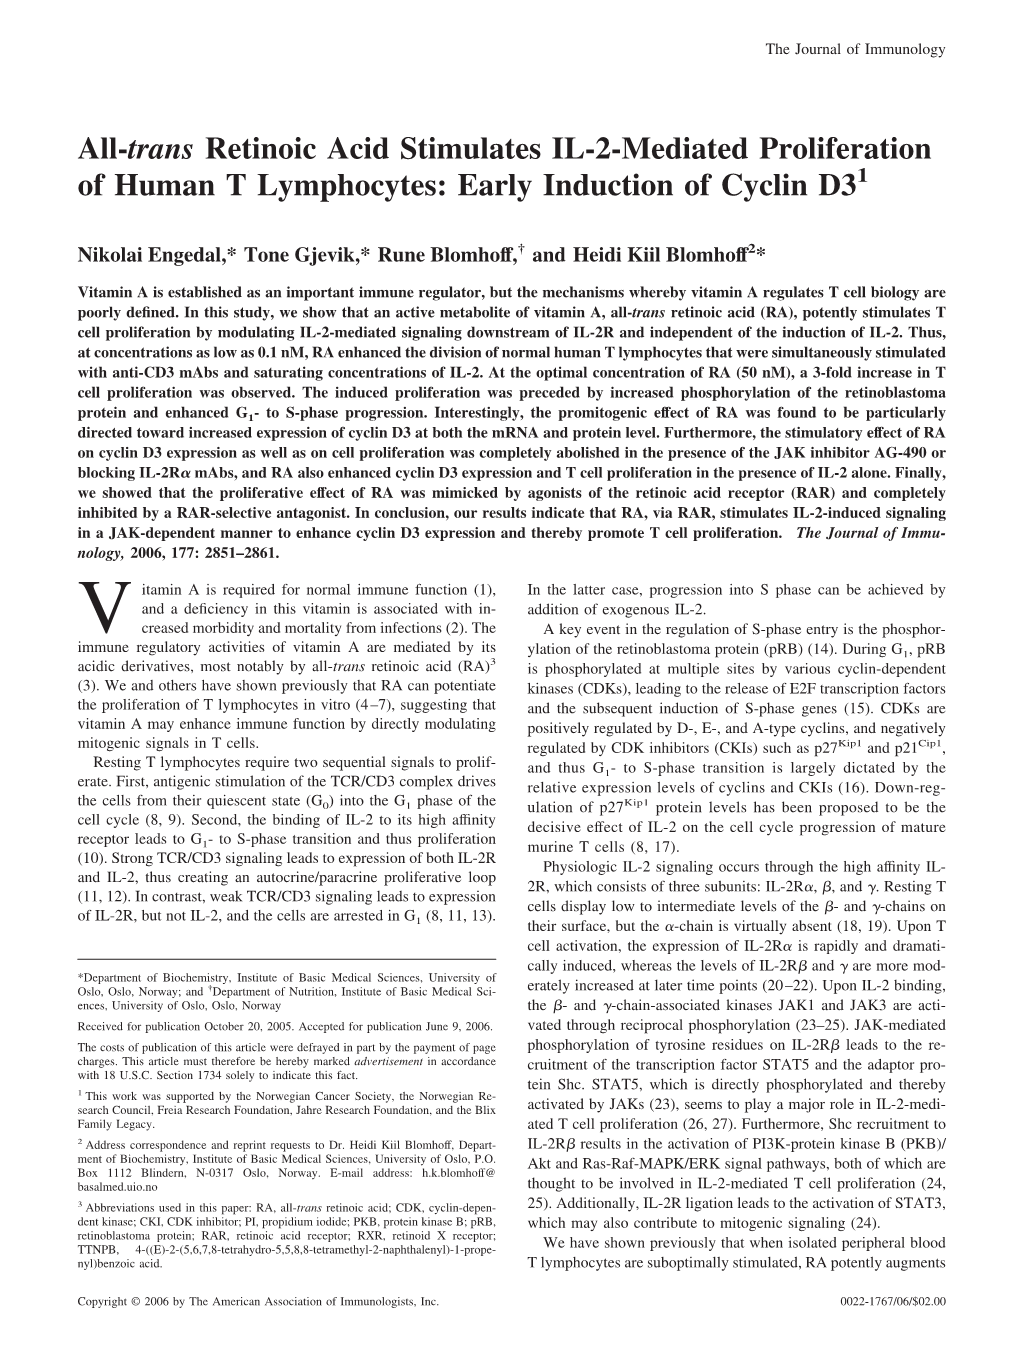 Lymphocytes: Early Induction of Cyclin D3 IL